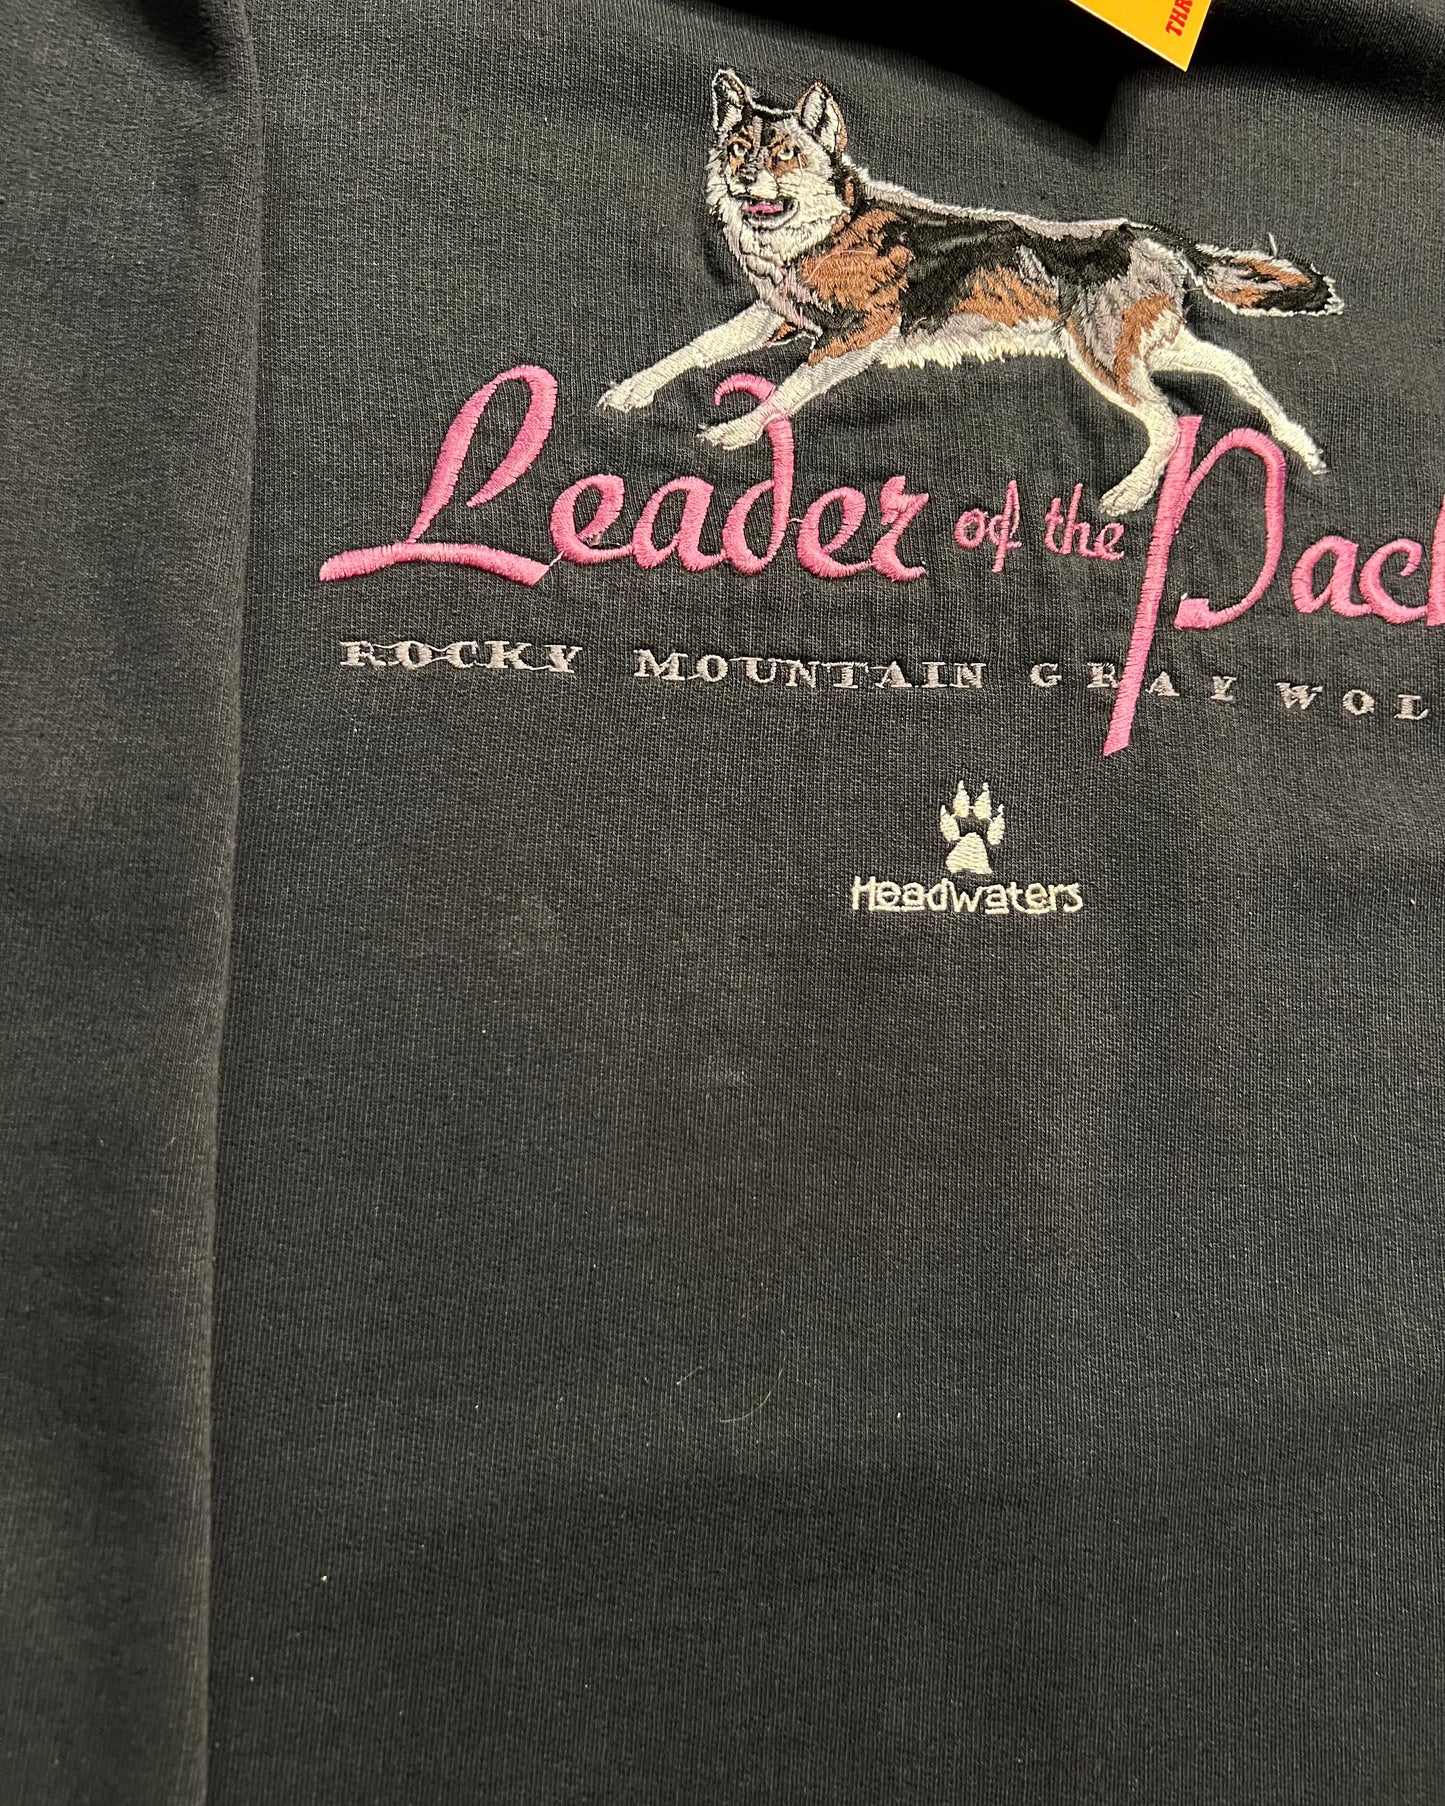 Vintage Rocky Mountain Gray Wolf "Leader of the Pack" Crewneck